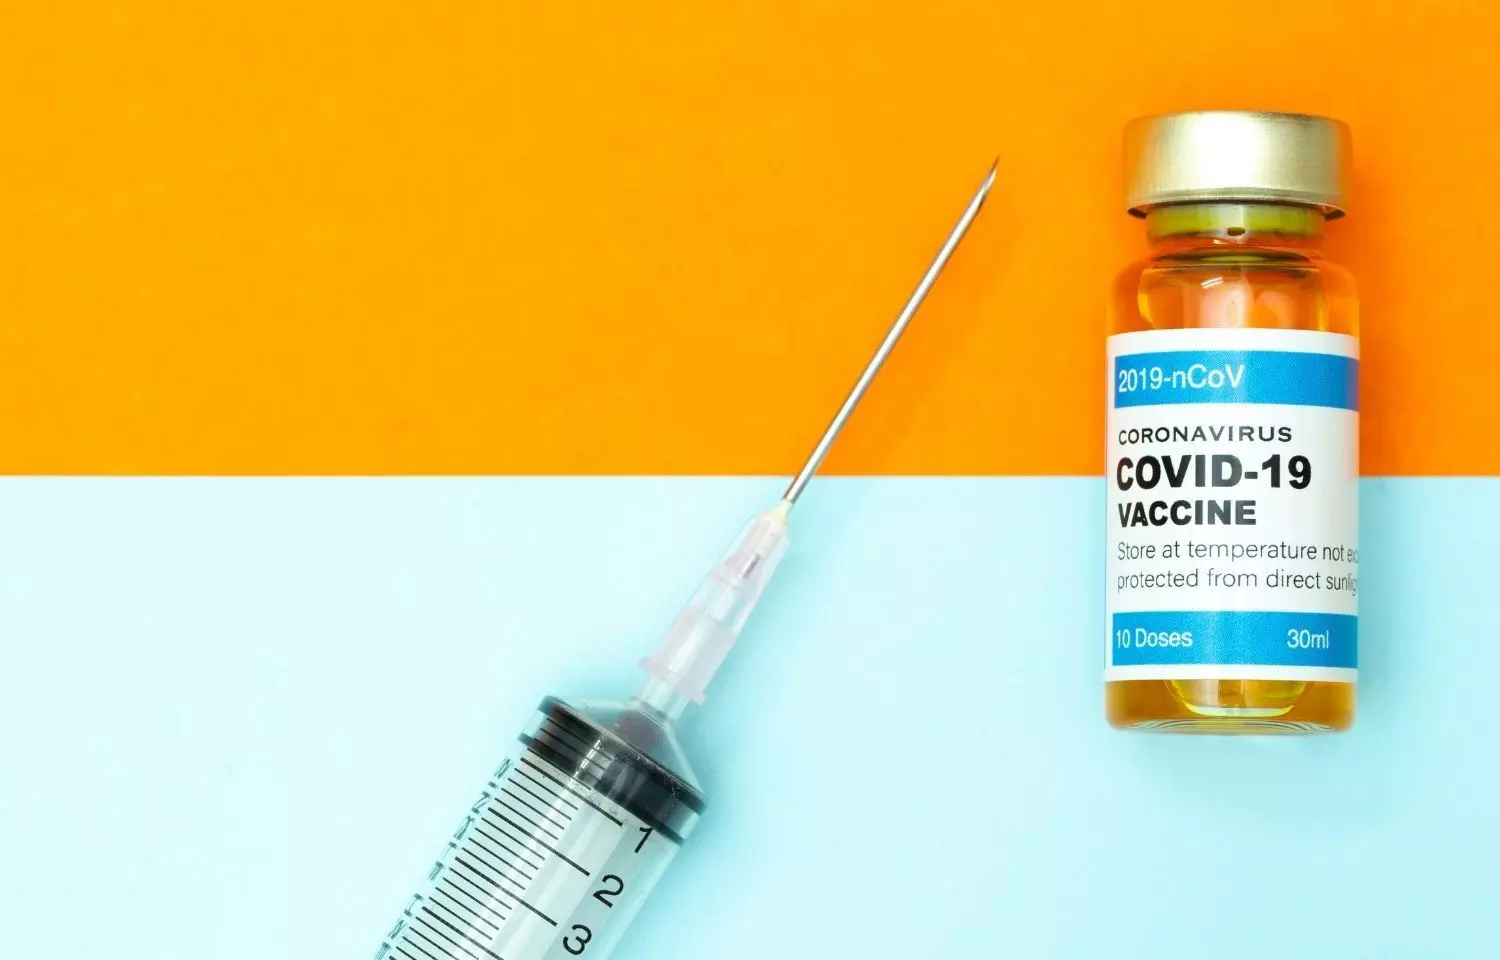 Novavax COVID vaccine Nuvaxovid gets provisional nod in New Zealand for adolescents aged 12 through 17